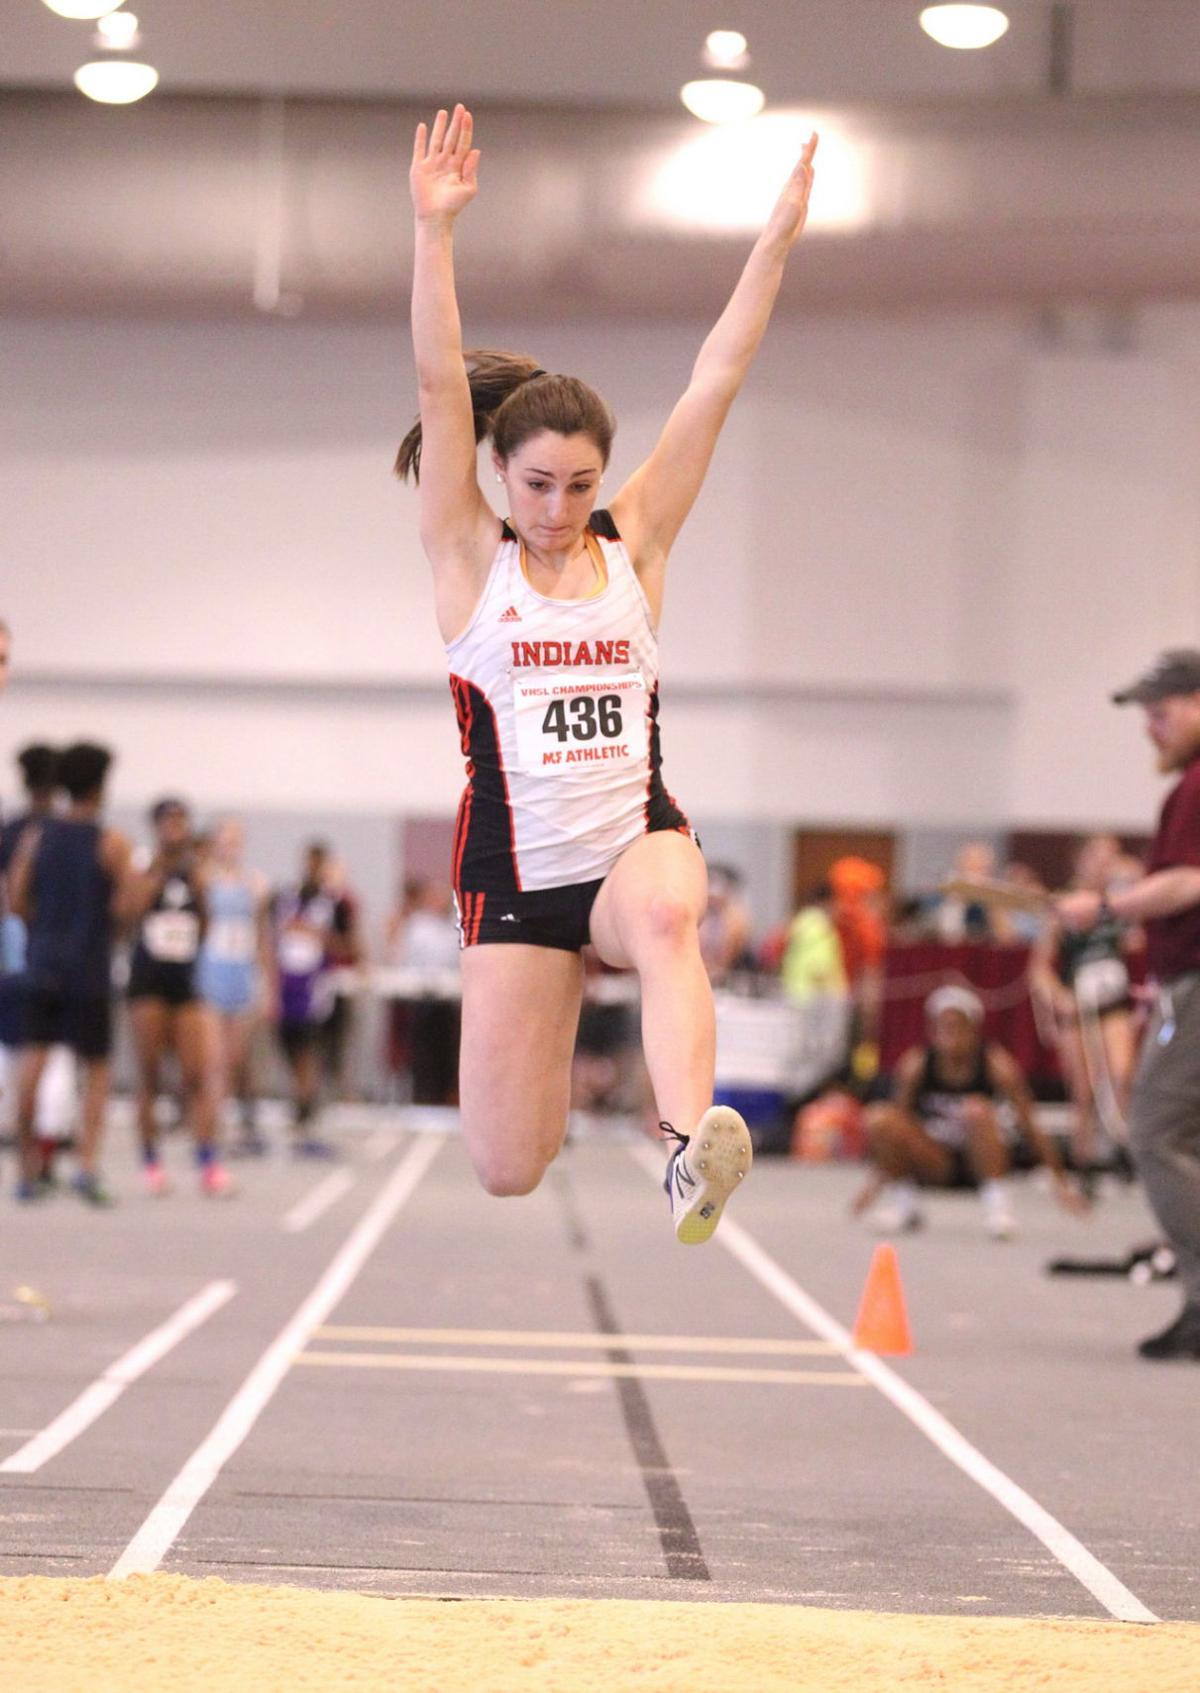 Scenes from the VHSL Class 1/2 state indoor track and field